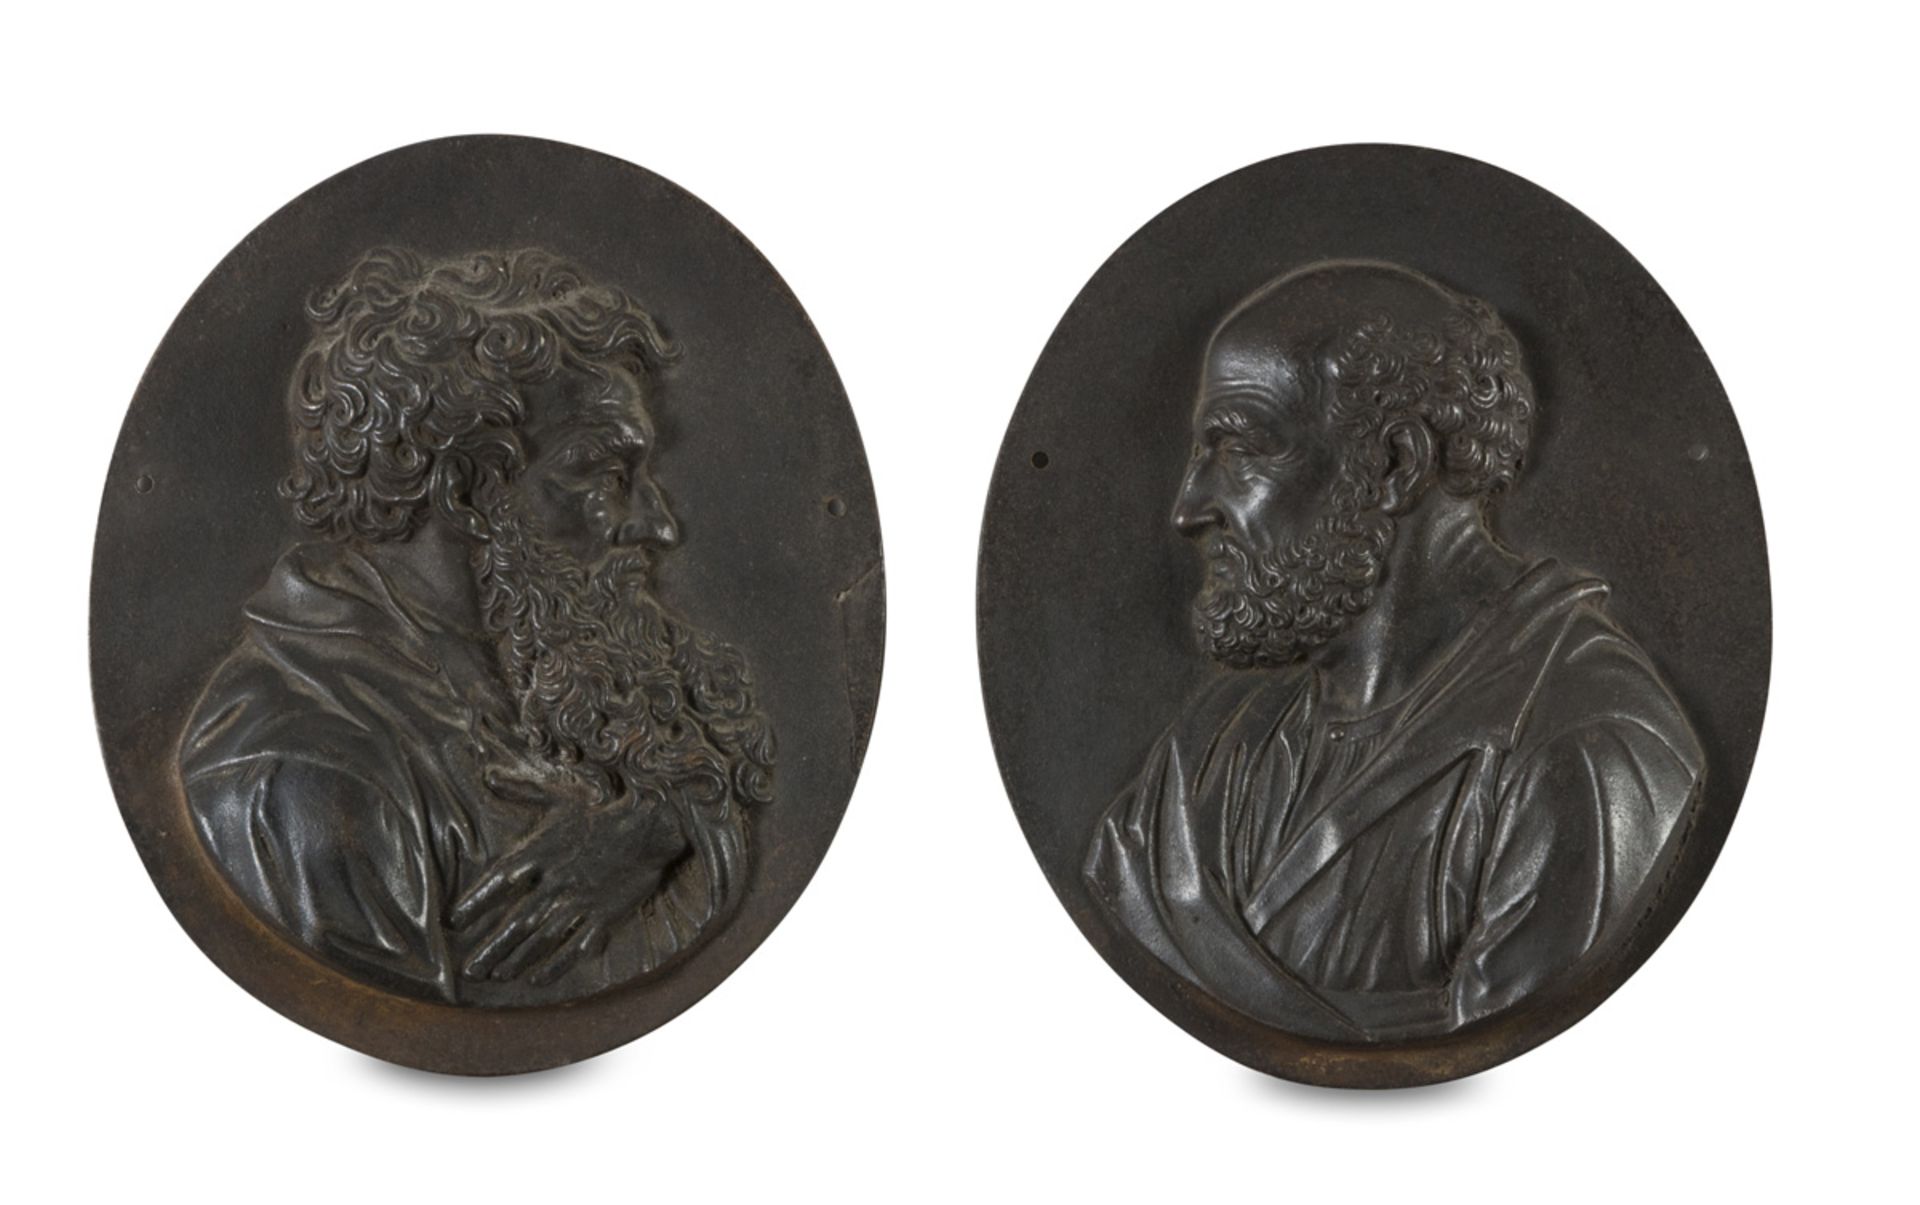 PAIR OF SMALL HIGH-RELIEF SCULPTURES IN IRON 19TH CENTURY